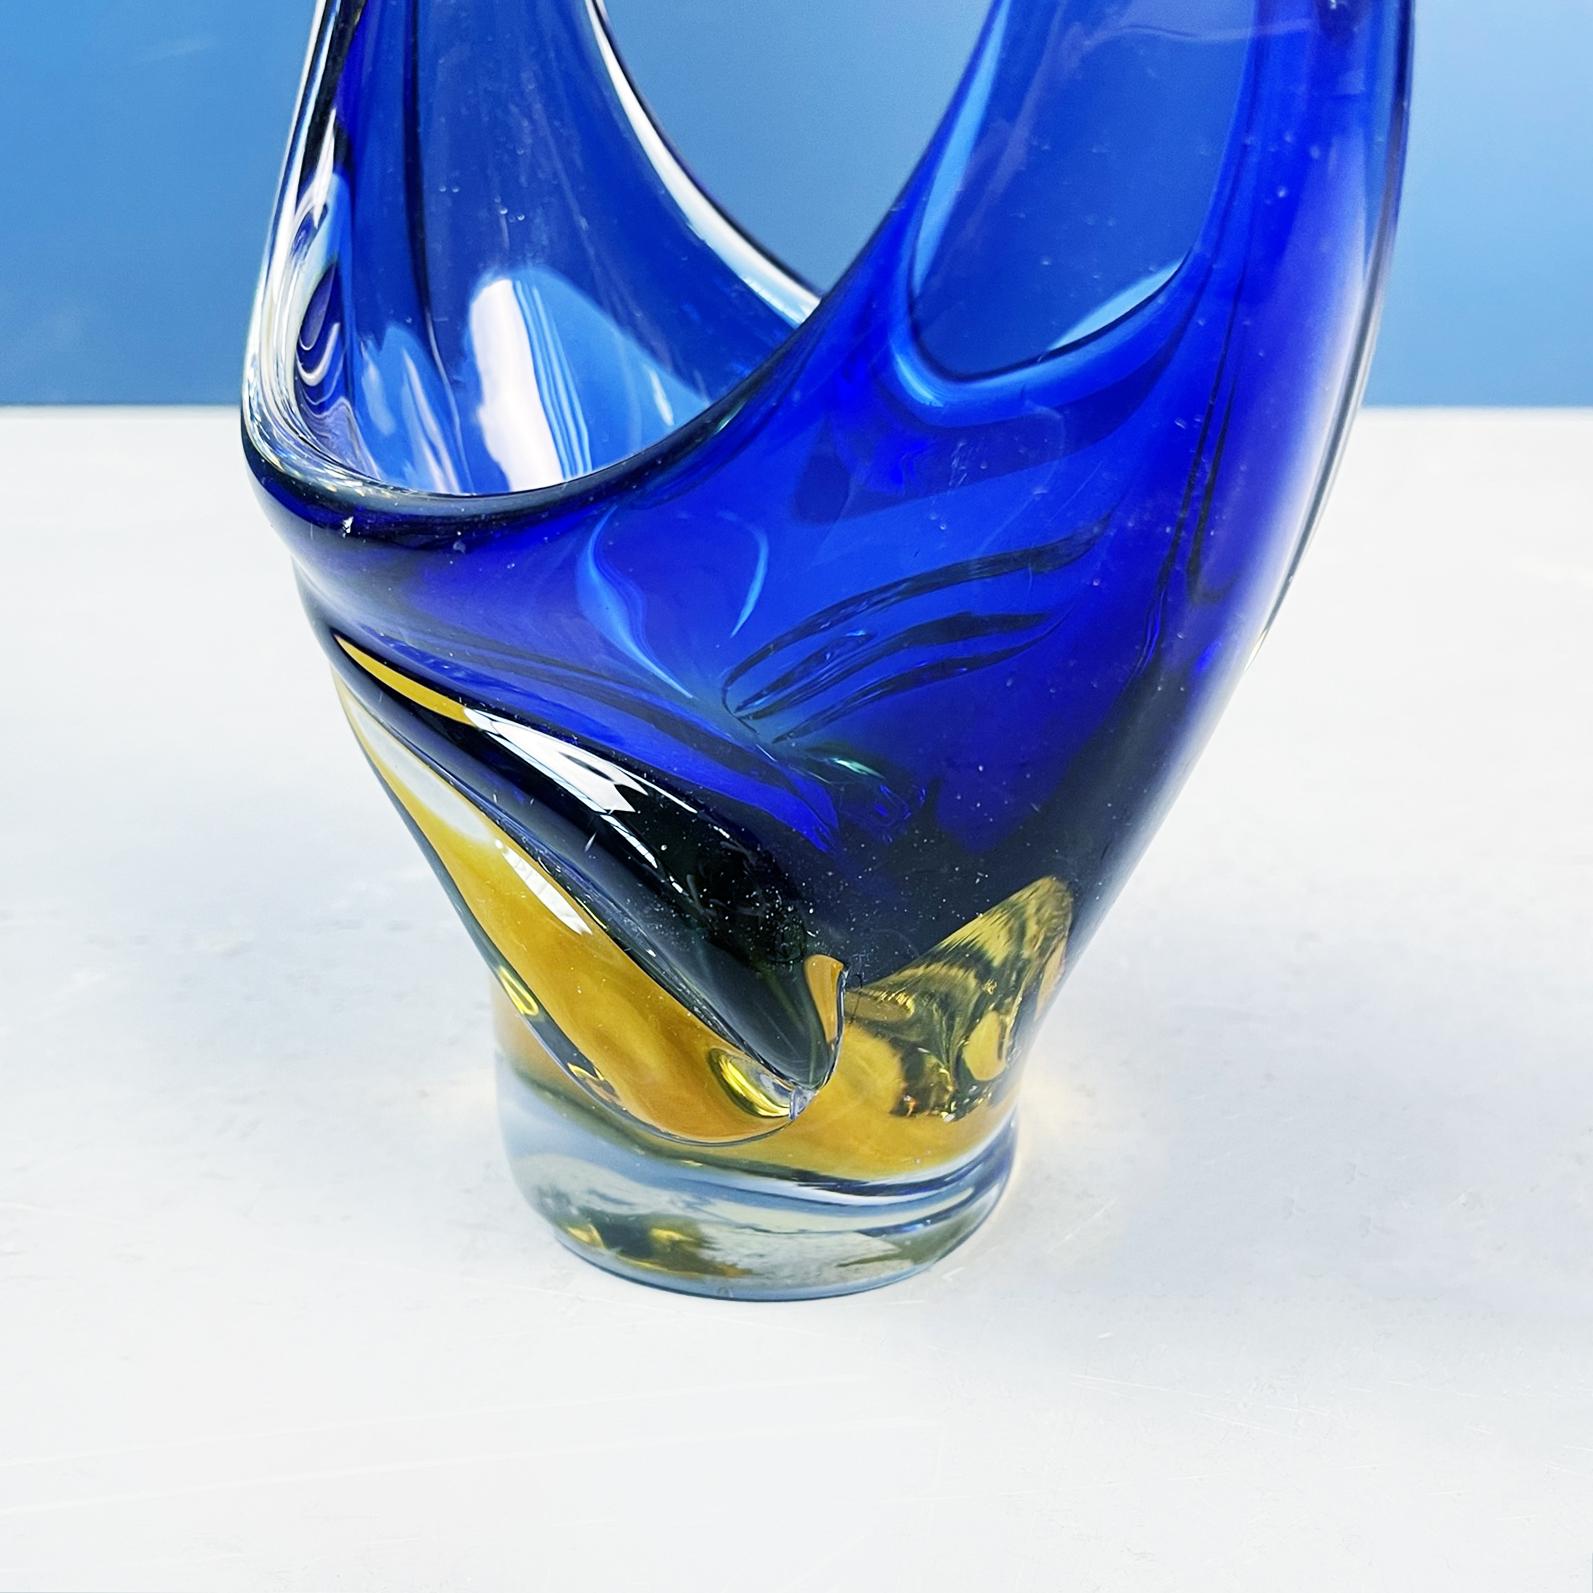 Italian Modern Sculpture in Blue and Yellow Murano Glass, 1970s For Sale 4